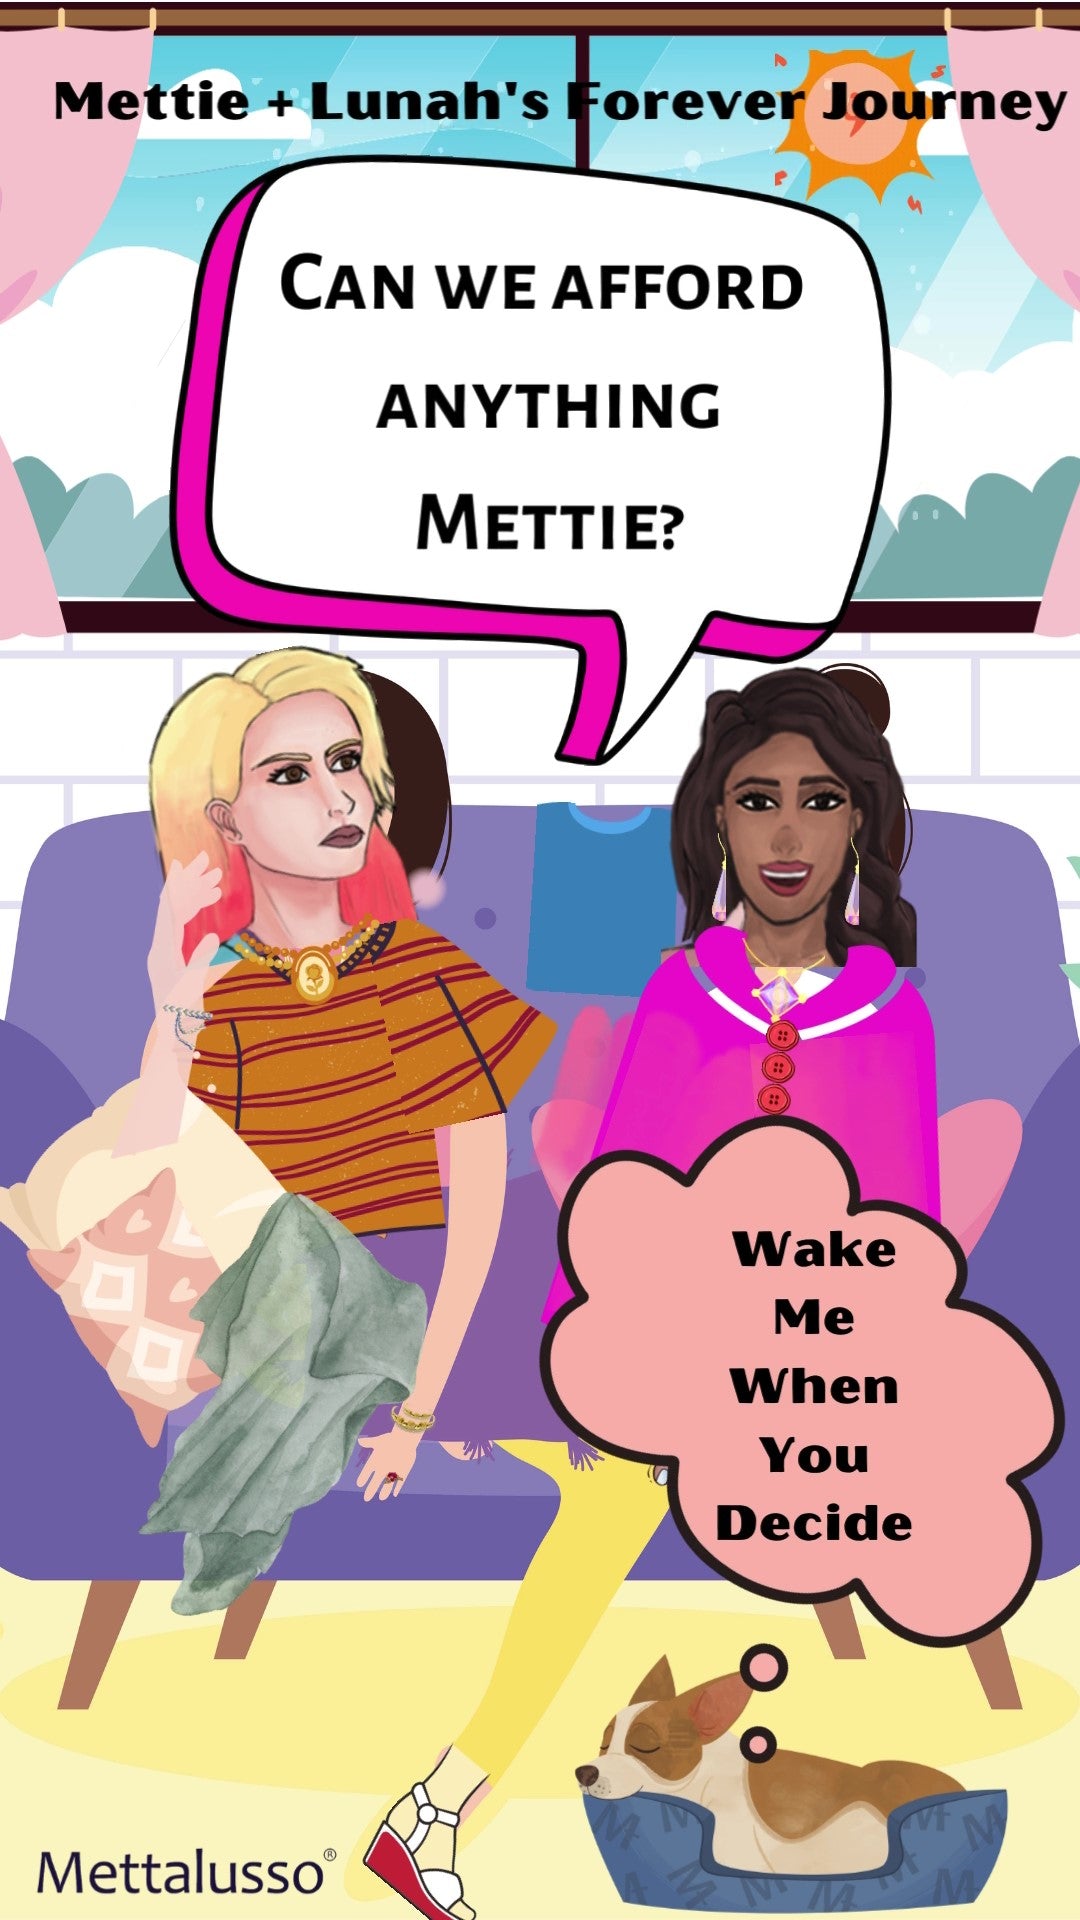 New episode Mettie + Lunah's Forever Journey by Mettalusso they want to know if they can afford shopping this year